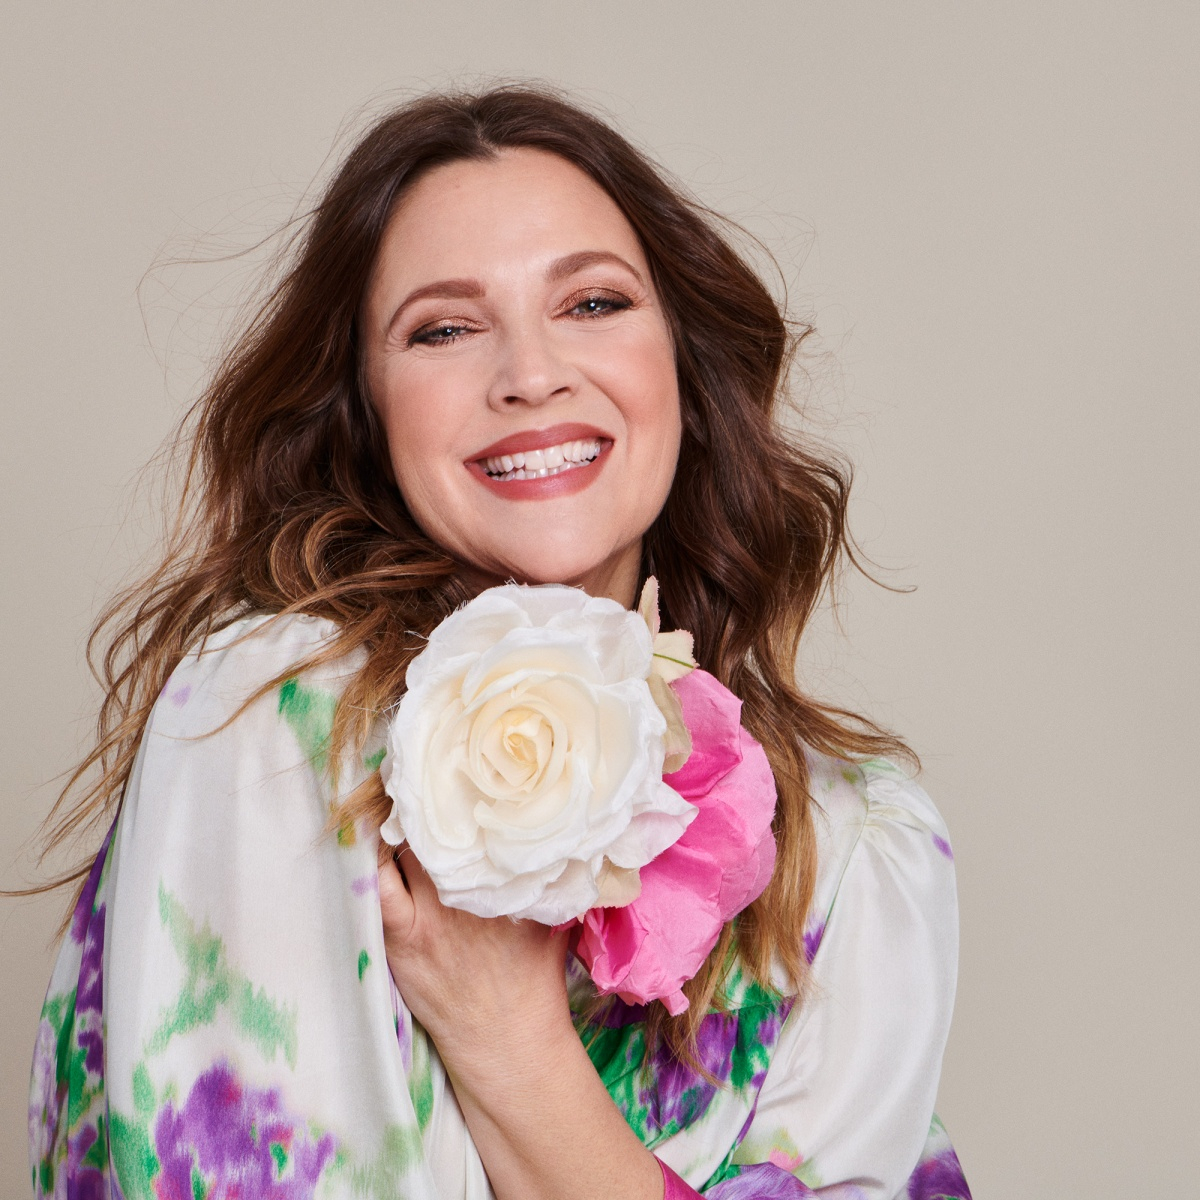 Drew Barrymore Shares Her Favorites From Her New (and Expanding!)  'Beautiful' Line